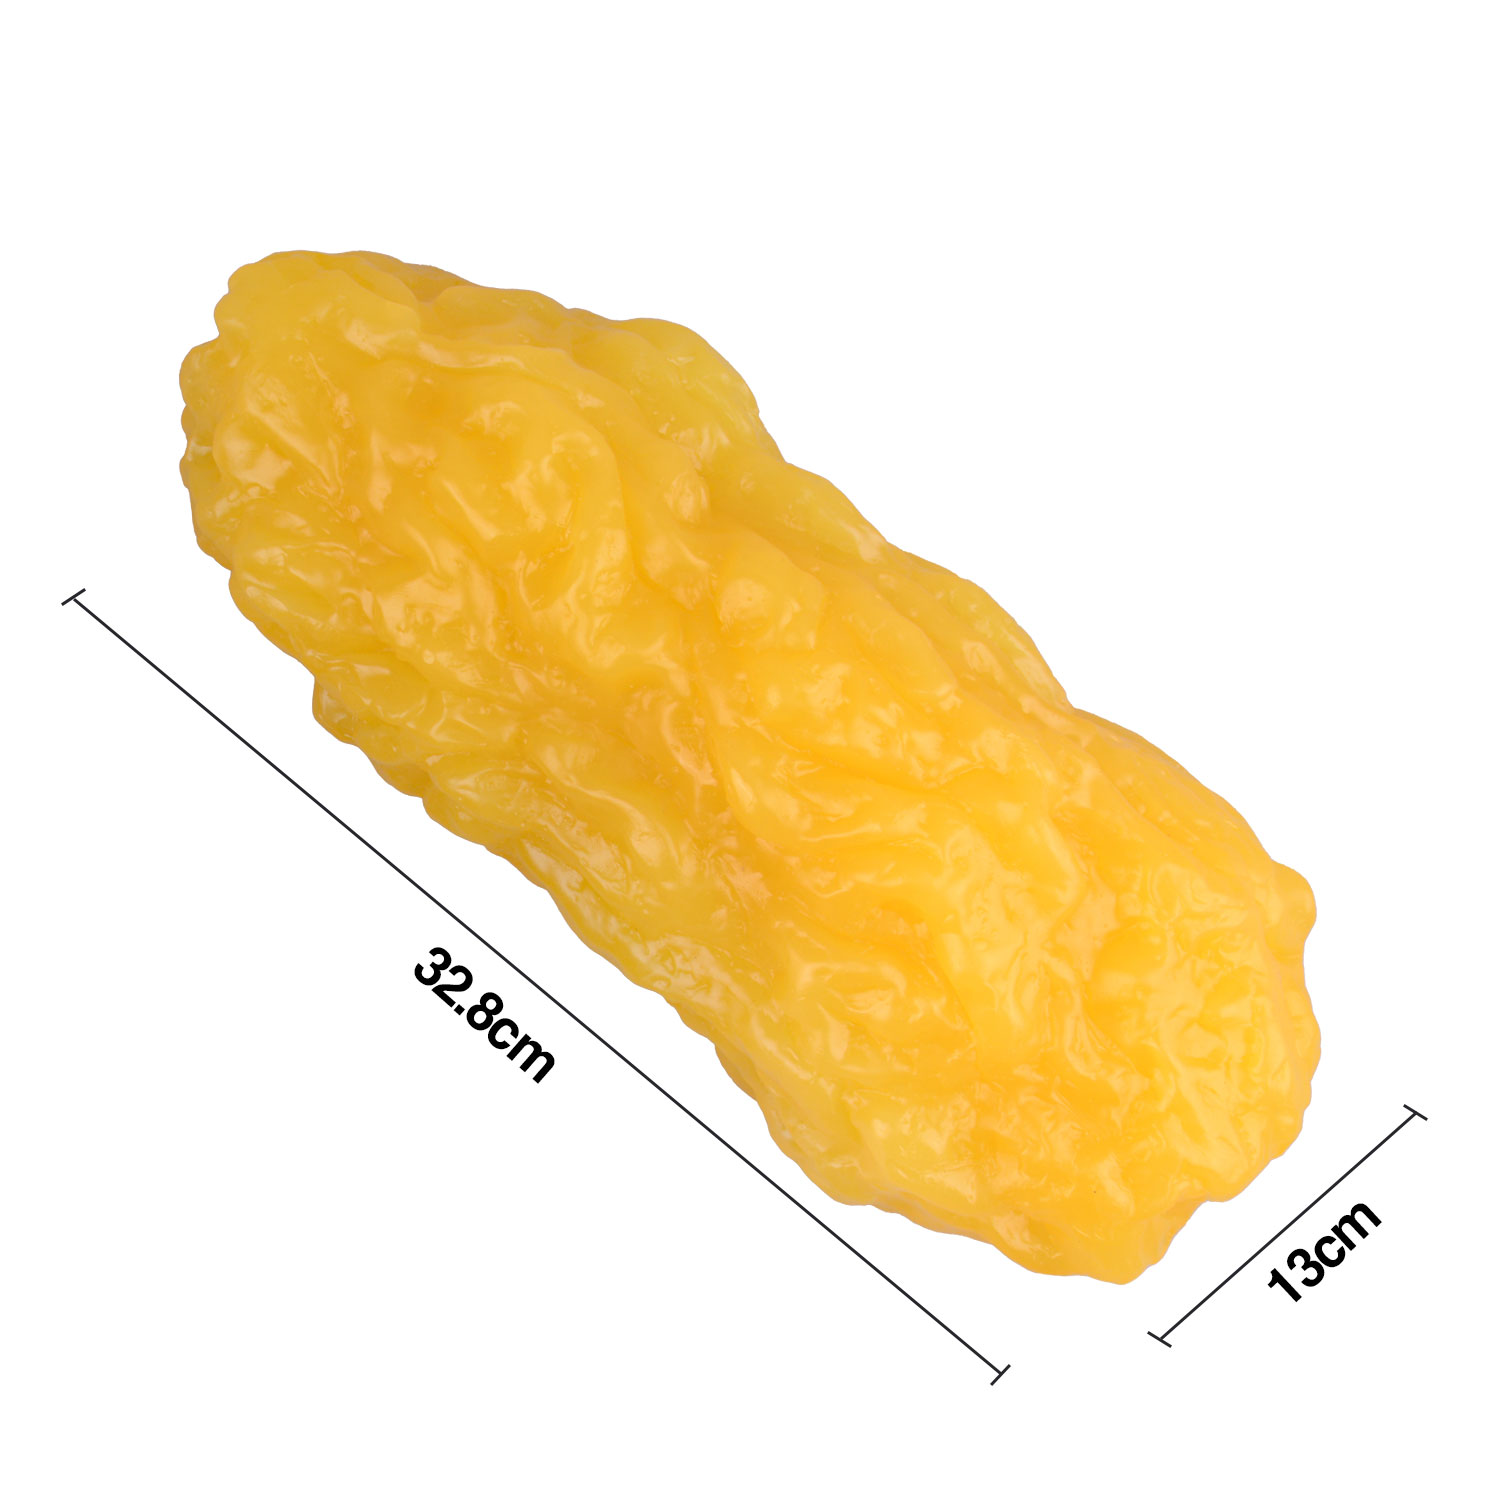 Upgraded 5lb of Body Fat Replica with Base